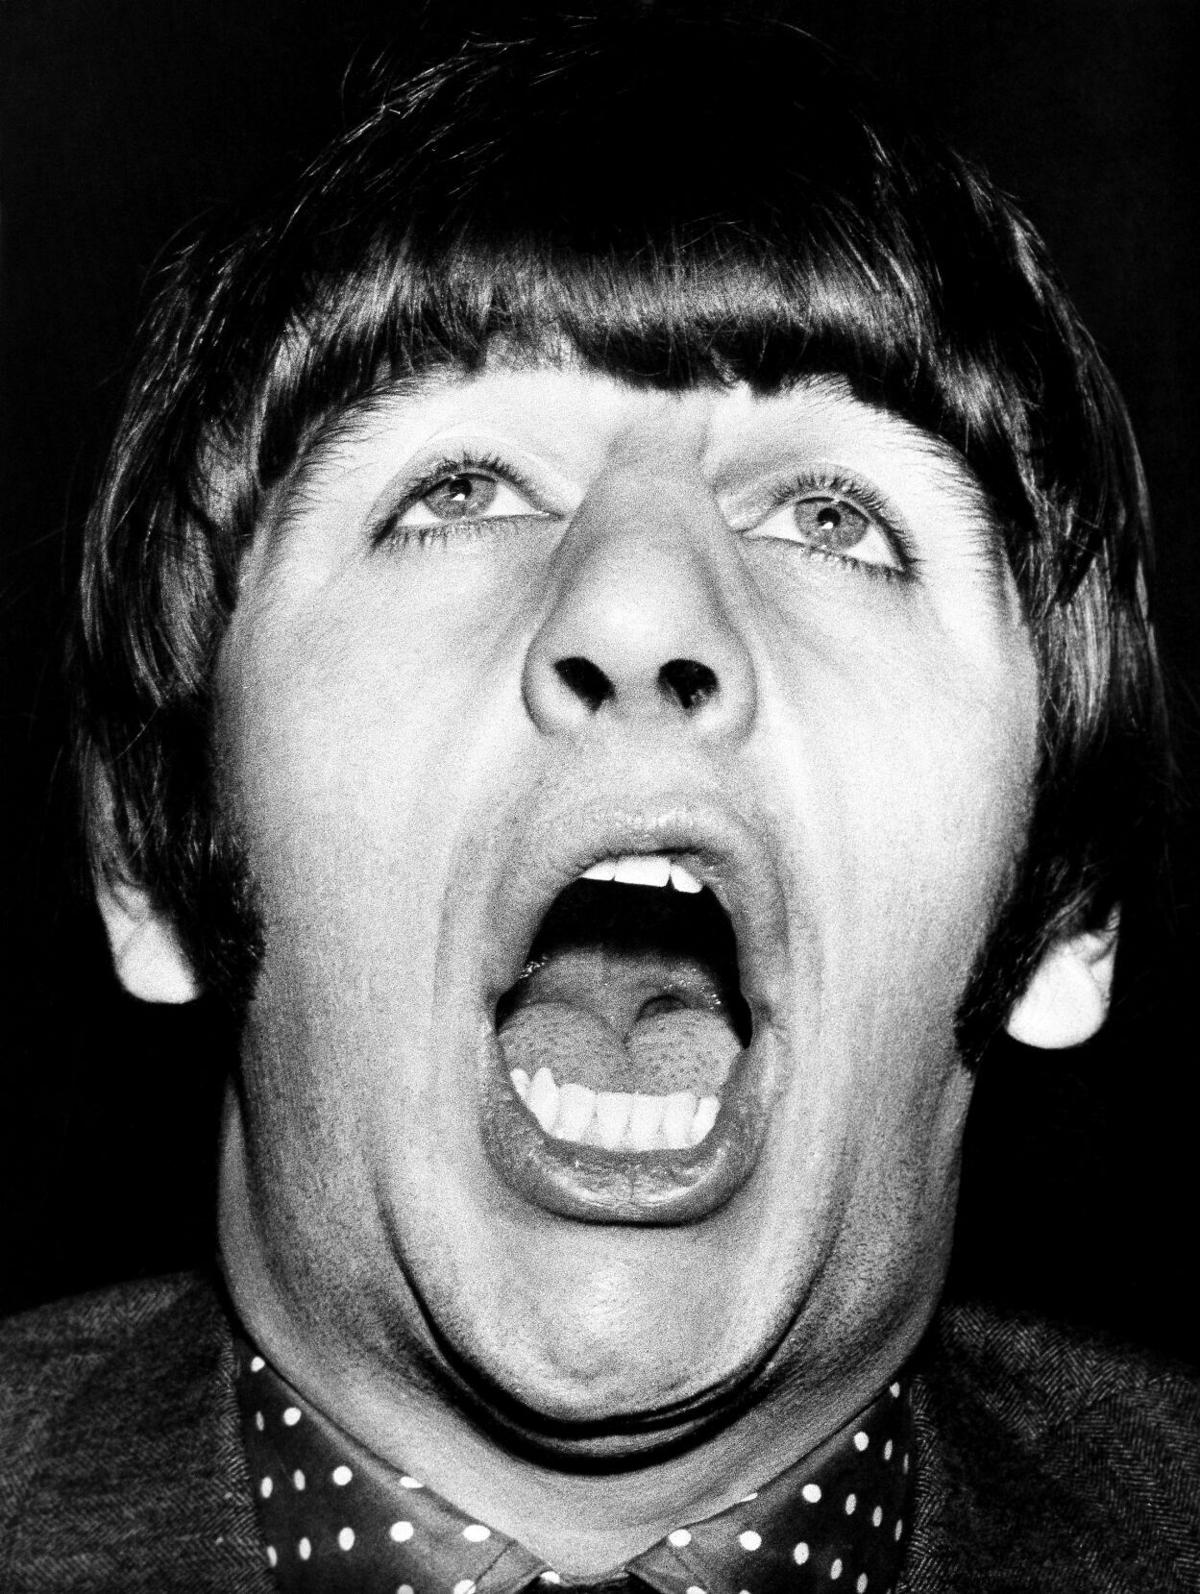 Ringo Starr turns 81 today. A look at the life of the Beatles drummer